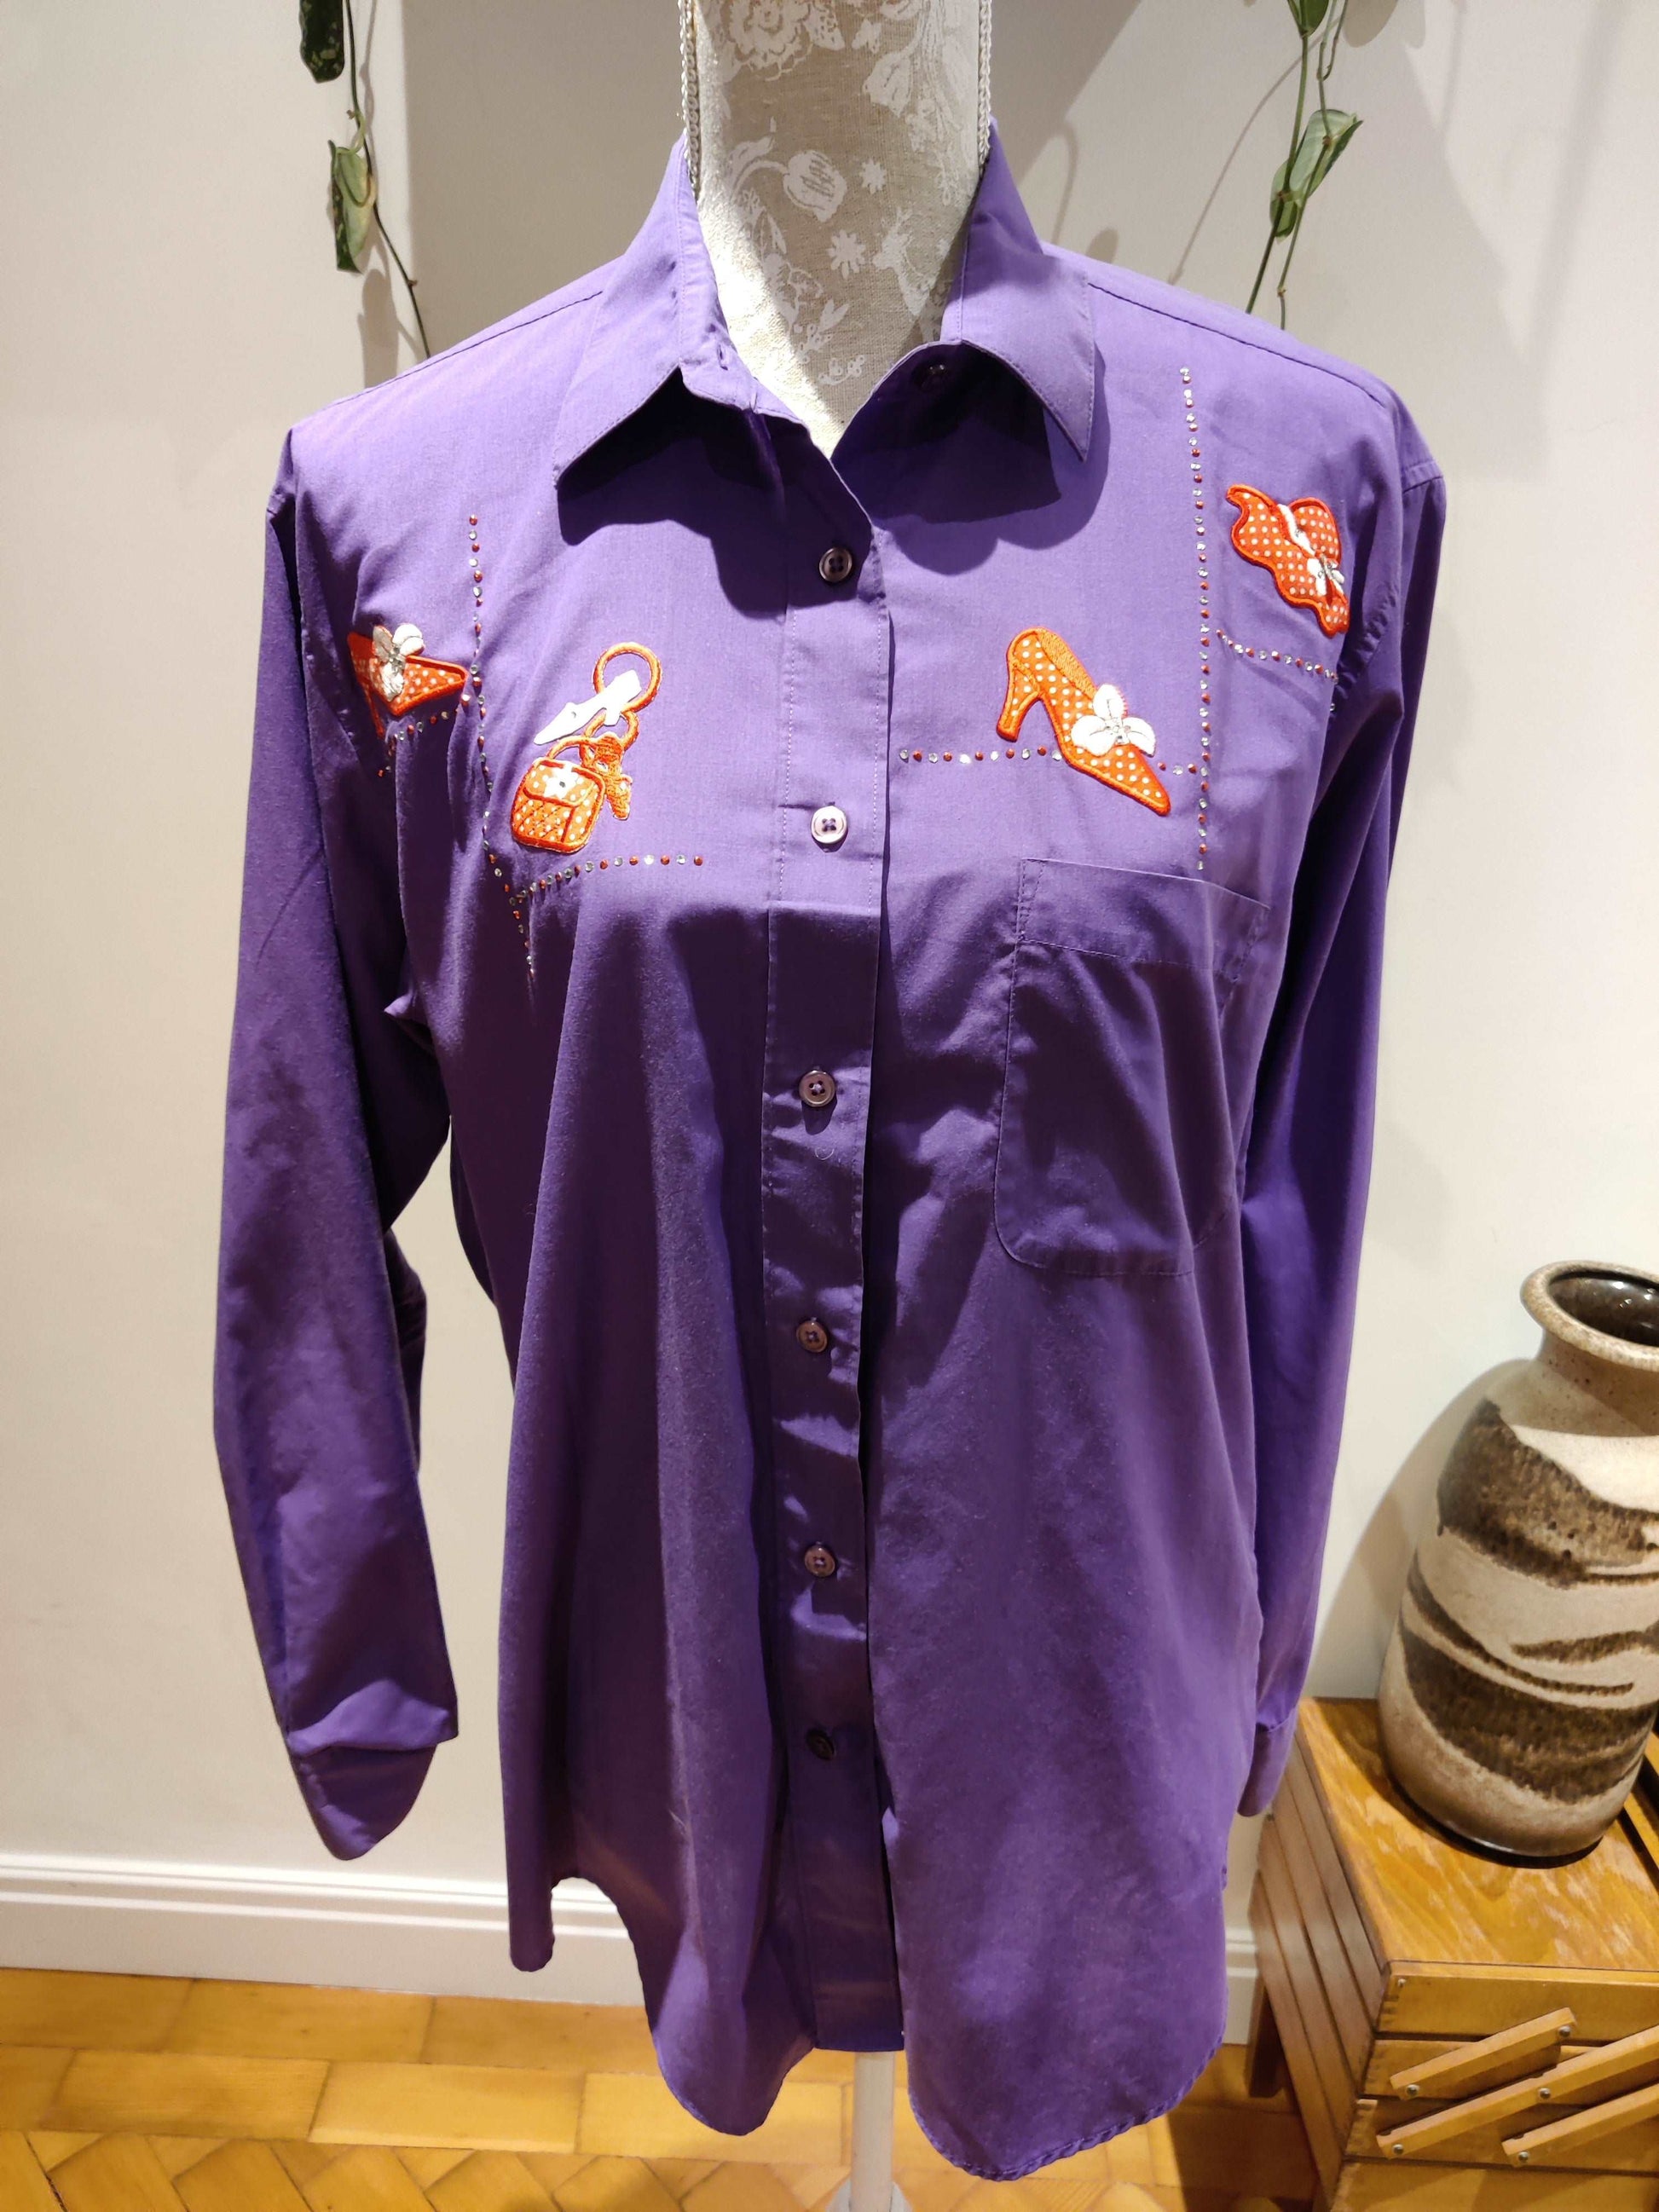 Awesome 80s purple blouse with shoes and hat design. Size 16.